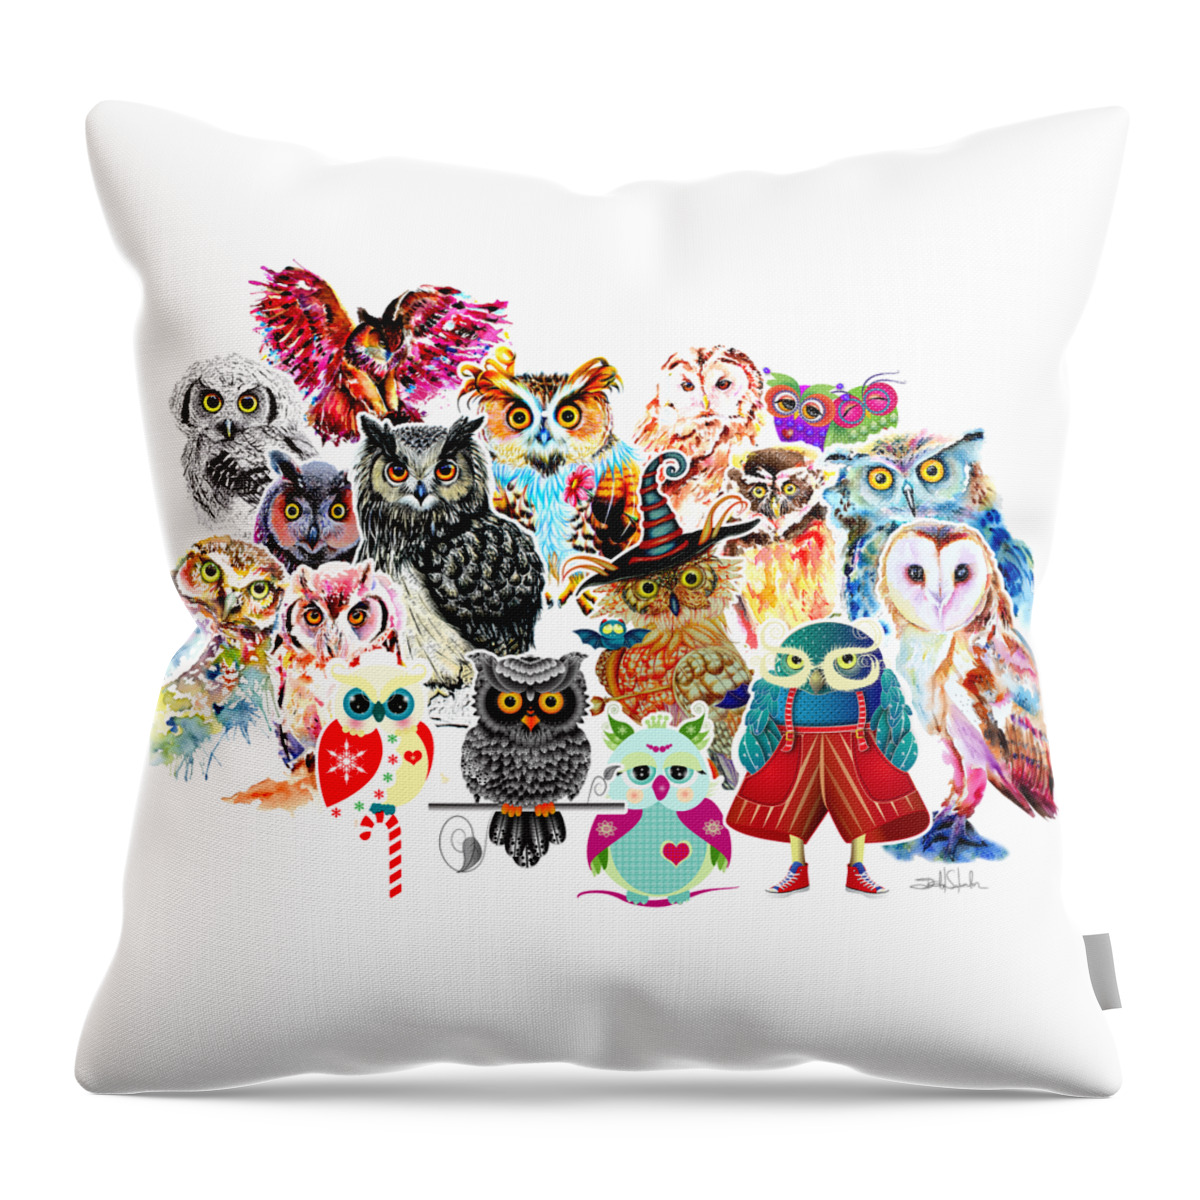 Bird Throw Pillow featuring the painting Owls Collage By Isabel Salvador by Isabel Salvador